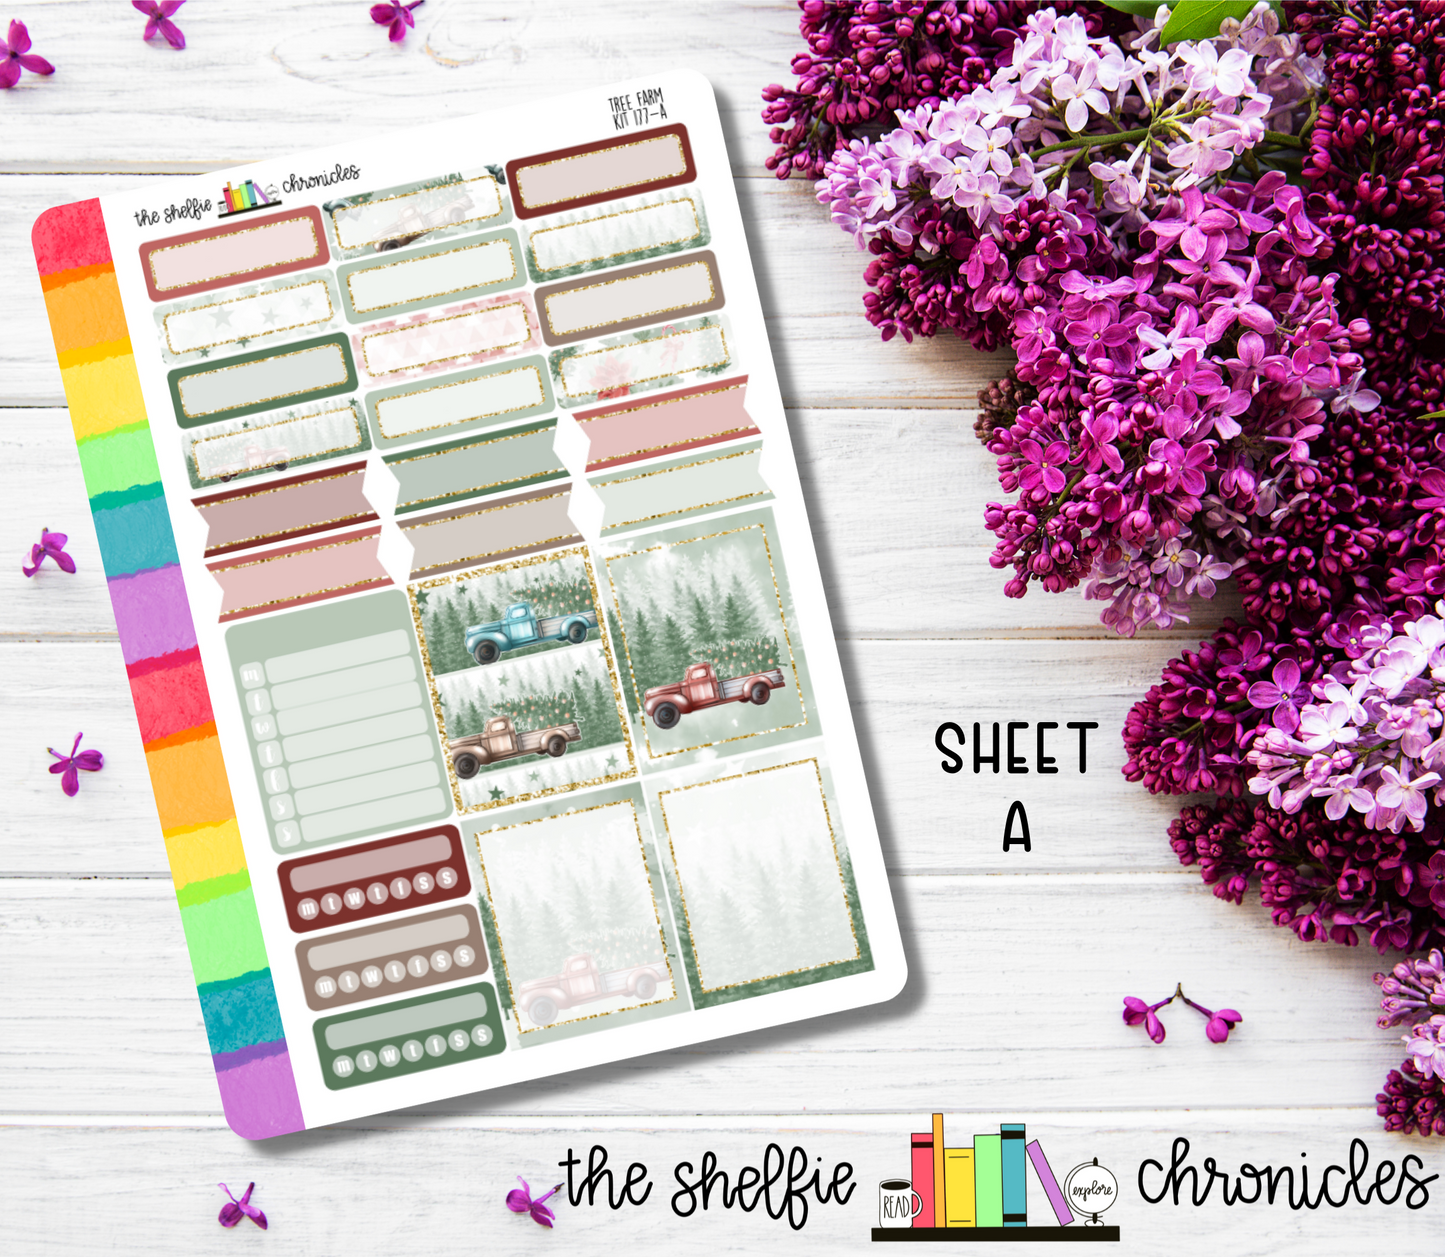 Kit 177 - Tree Farm Weekly Kit - Die Cut Stickers - Repositionable Paper - Made To Fit 7x9 Planners